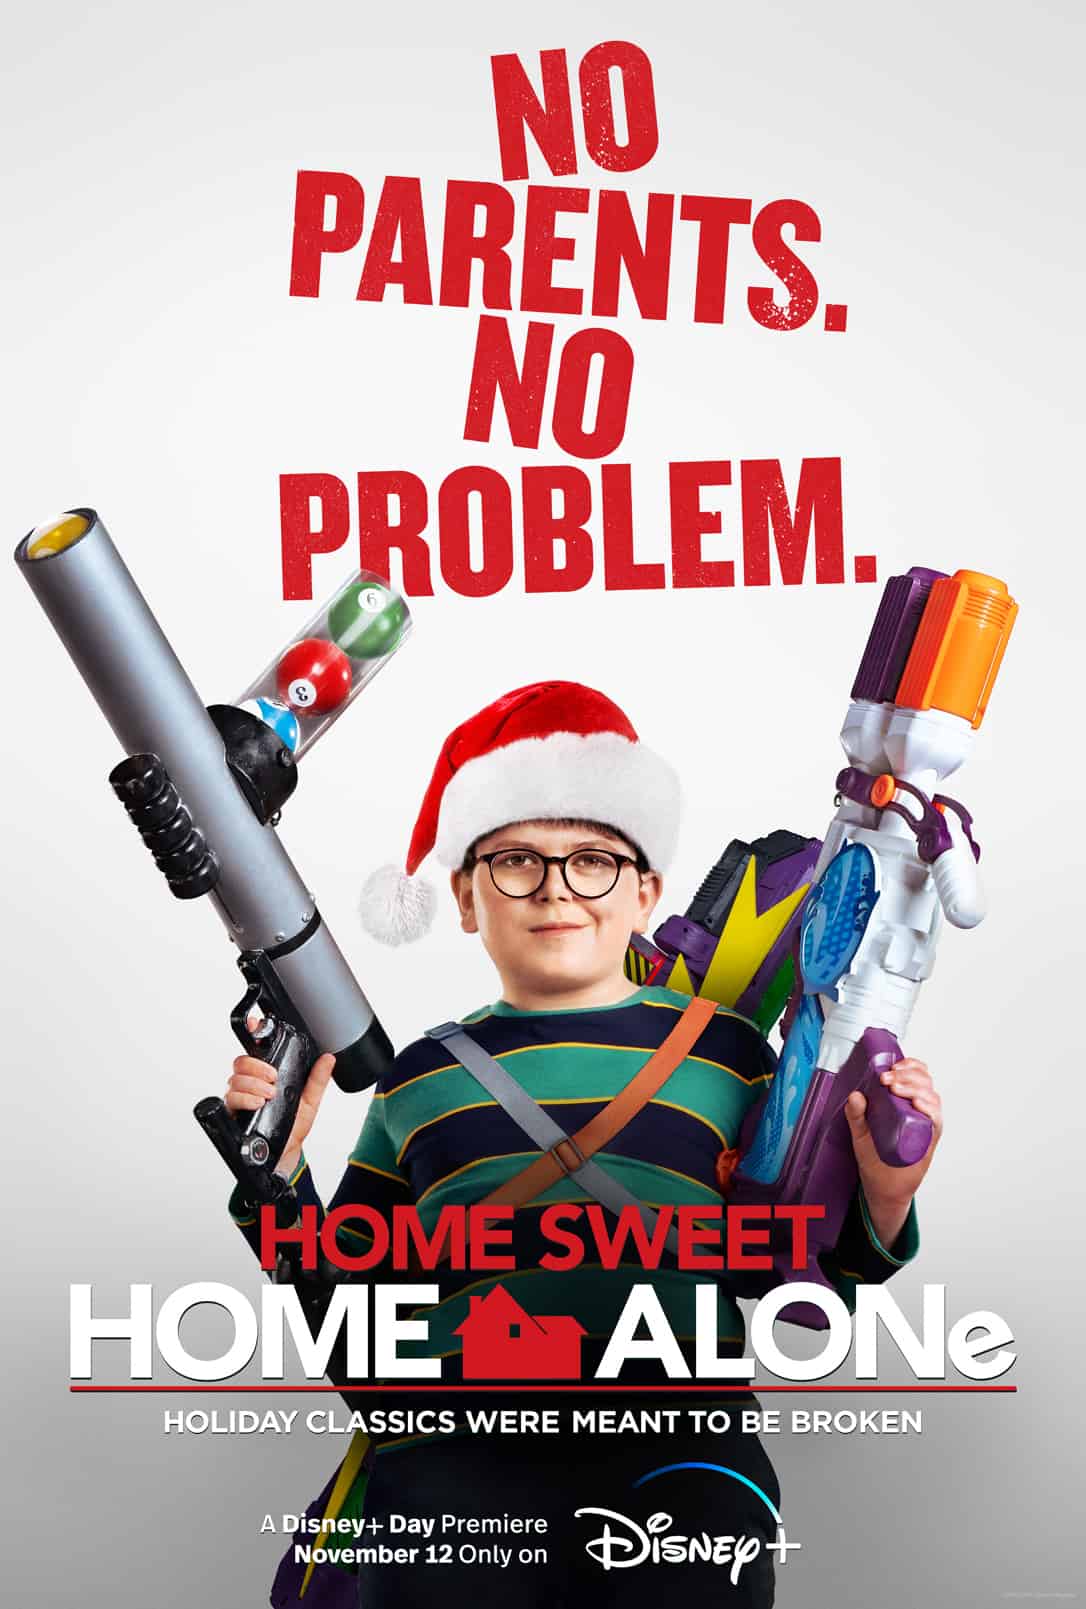 Home Sweet Home Alone Movie Review